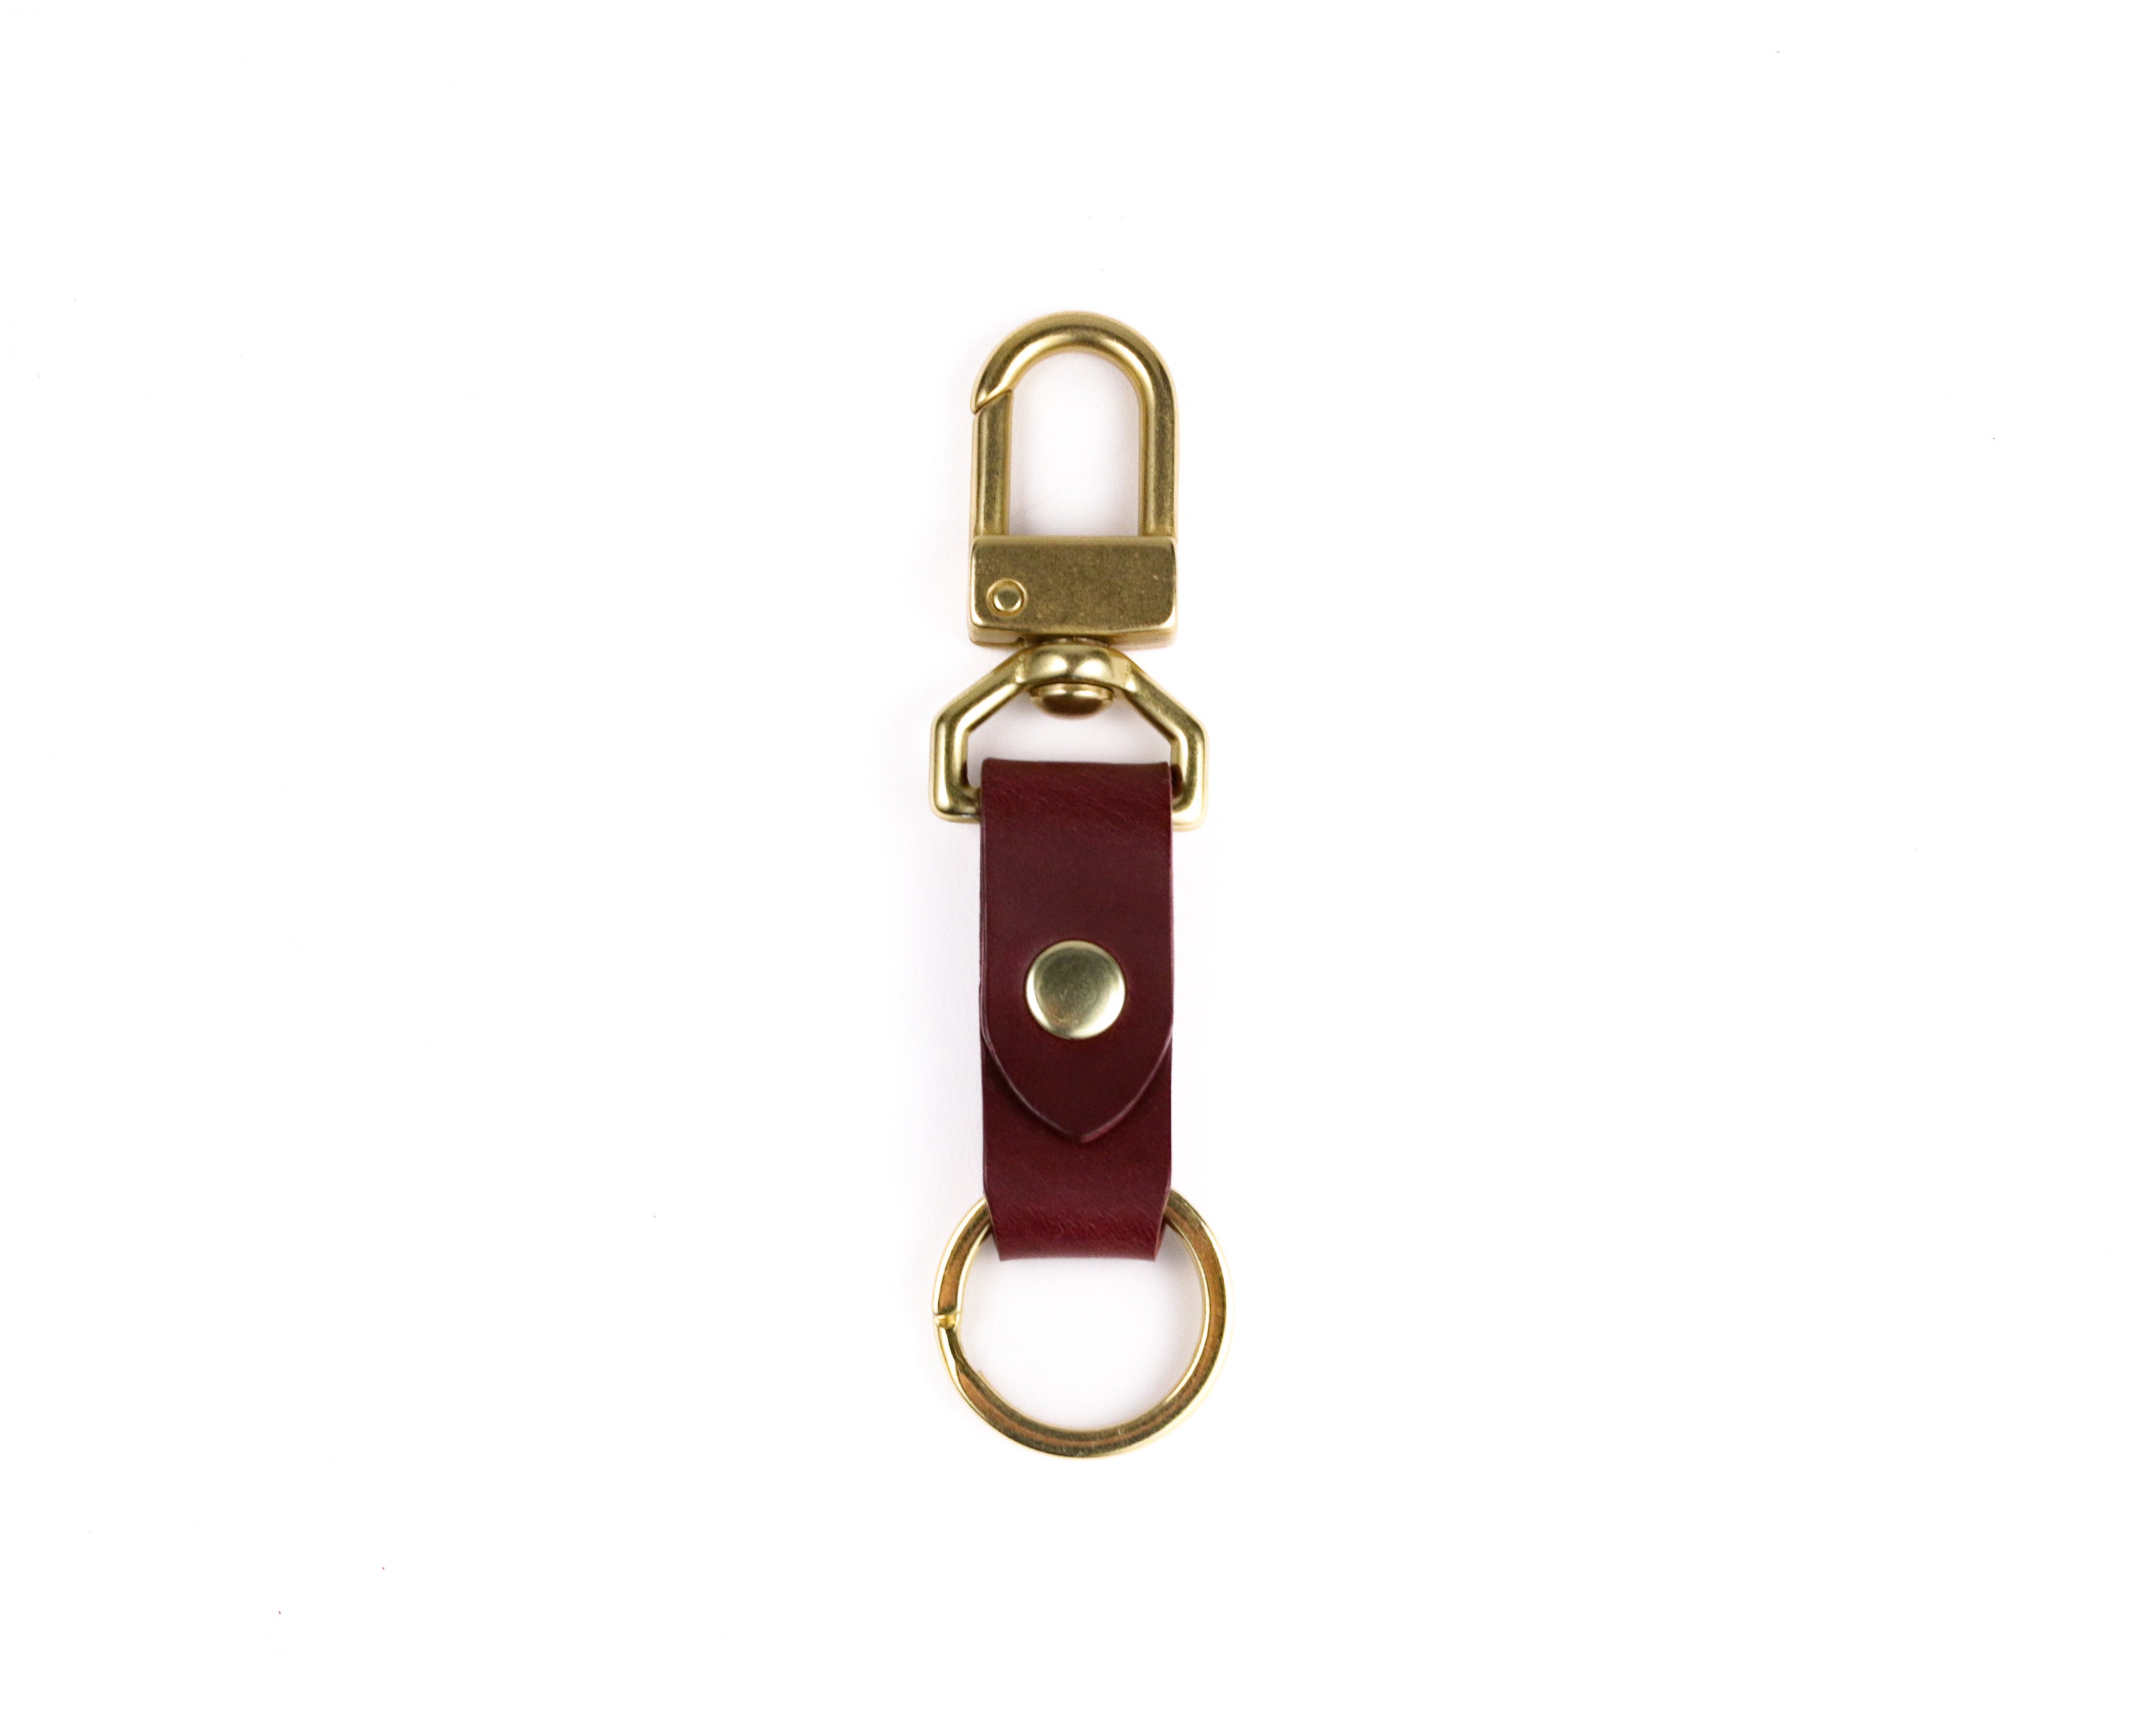 Turing Keychain: Natural